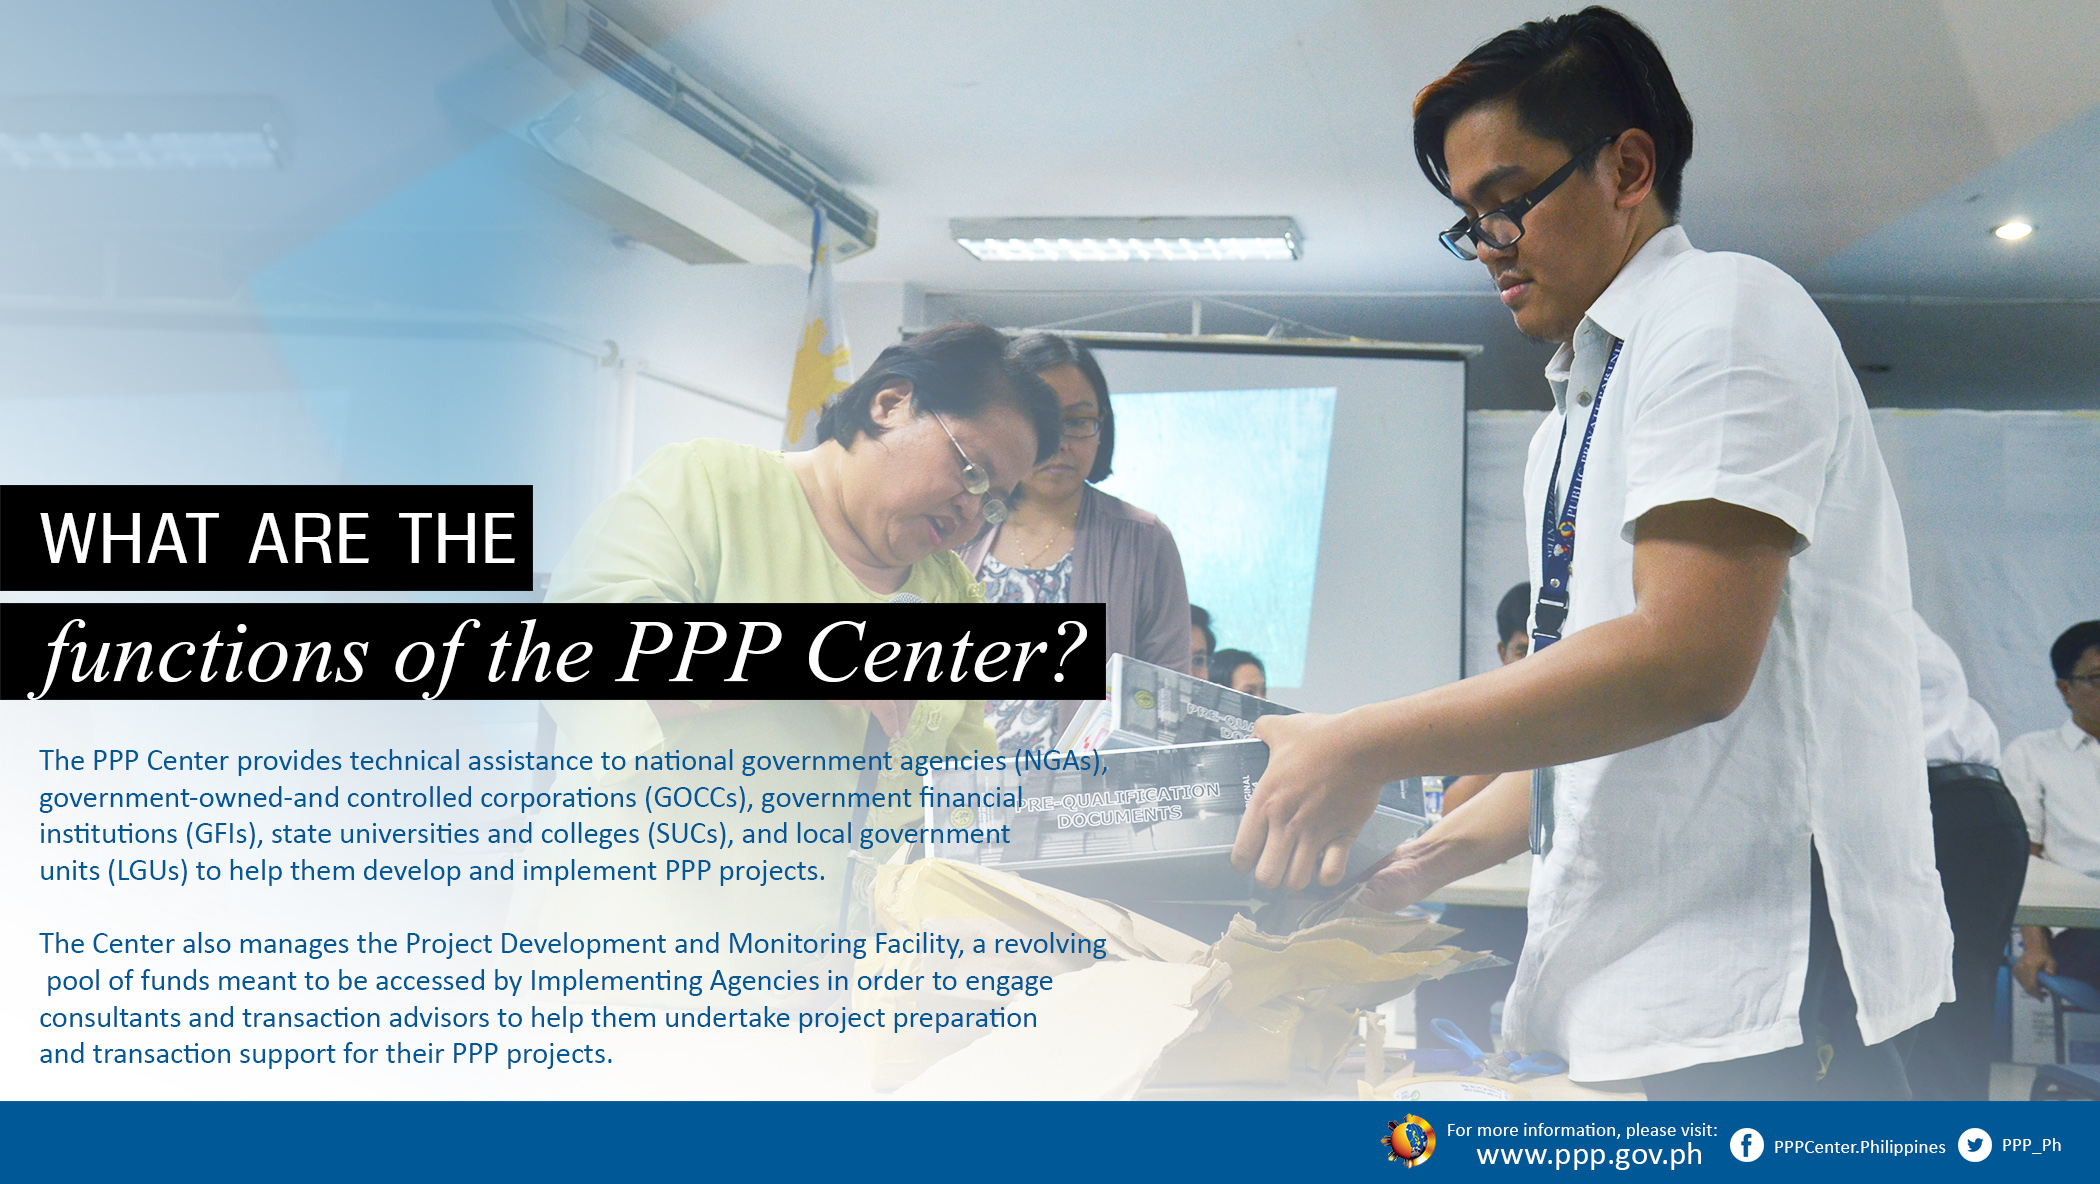 What are the functions of the PPP Center?